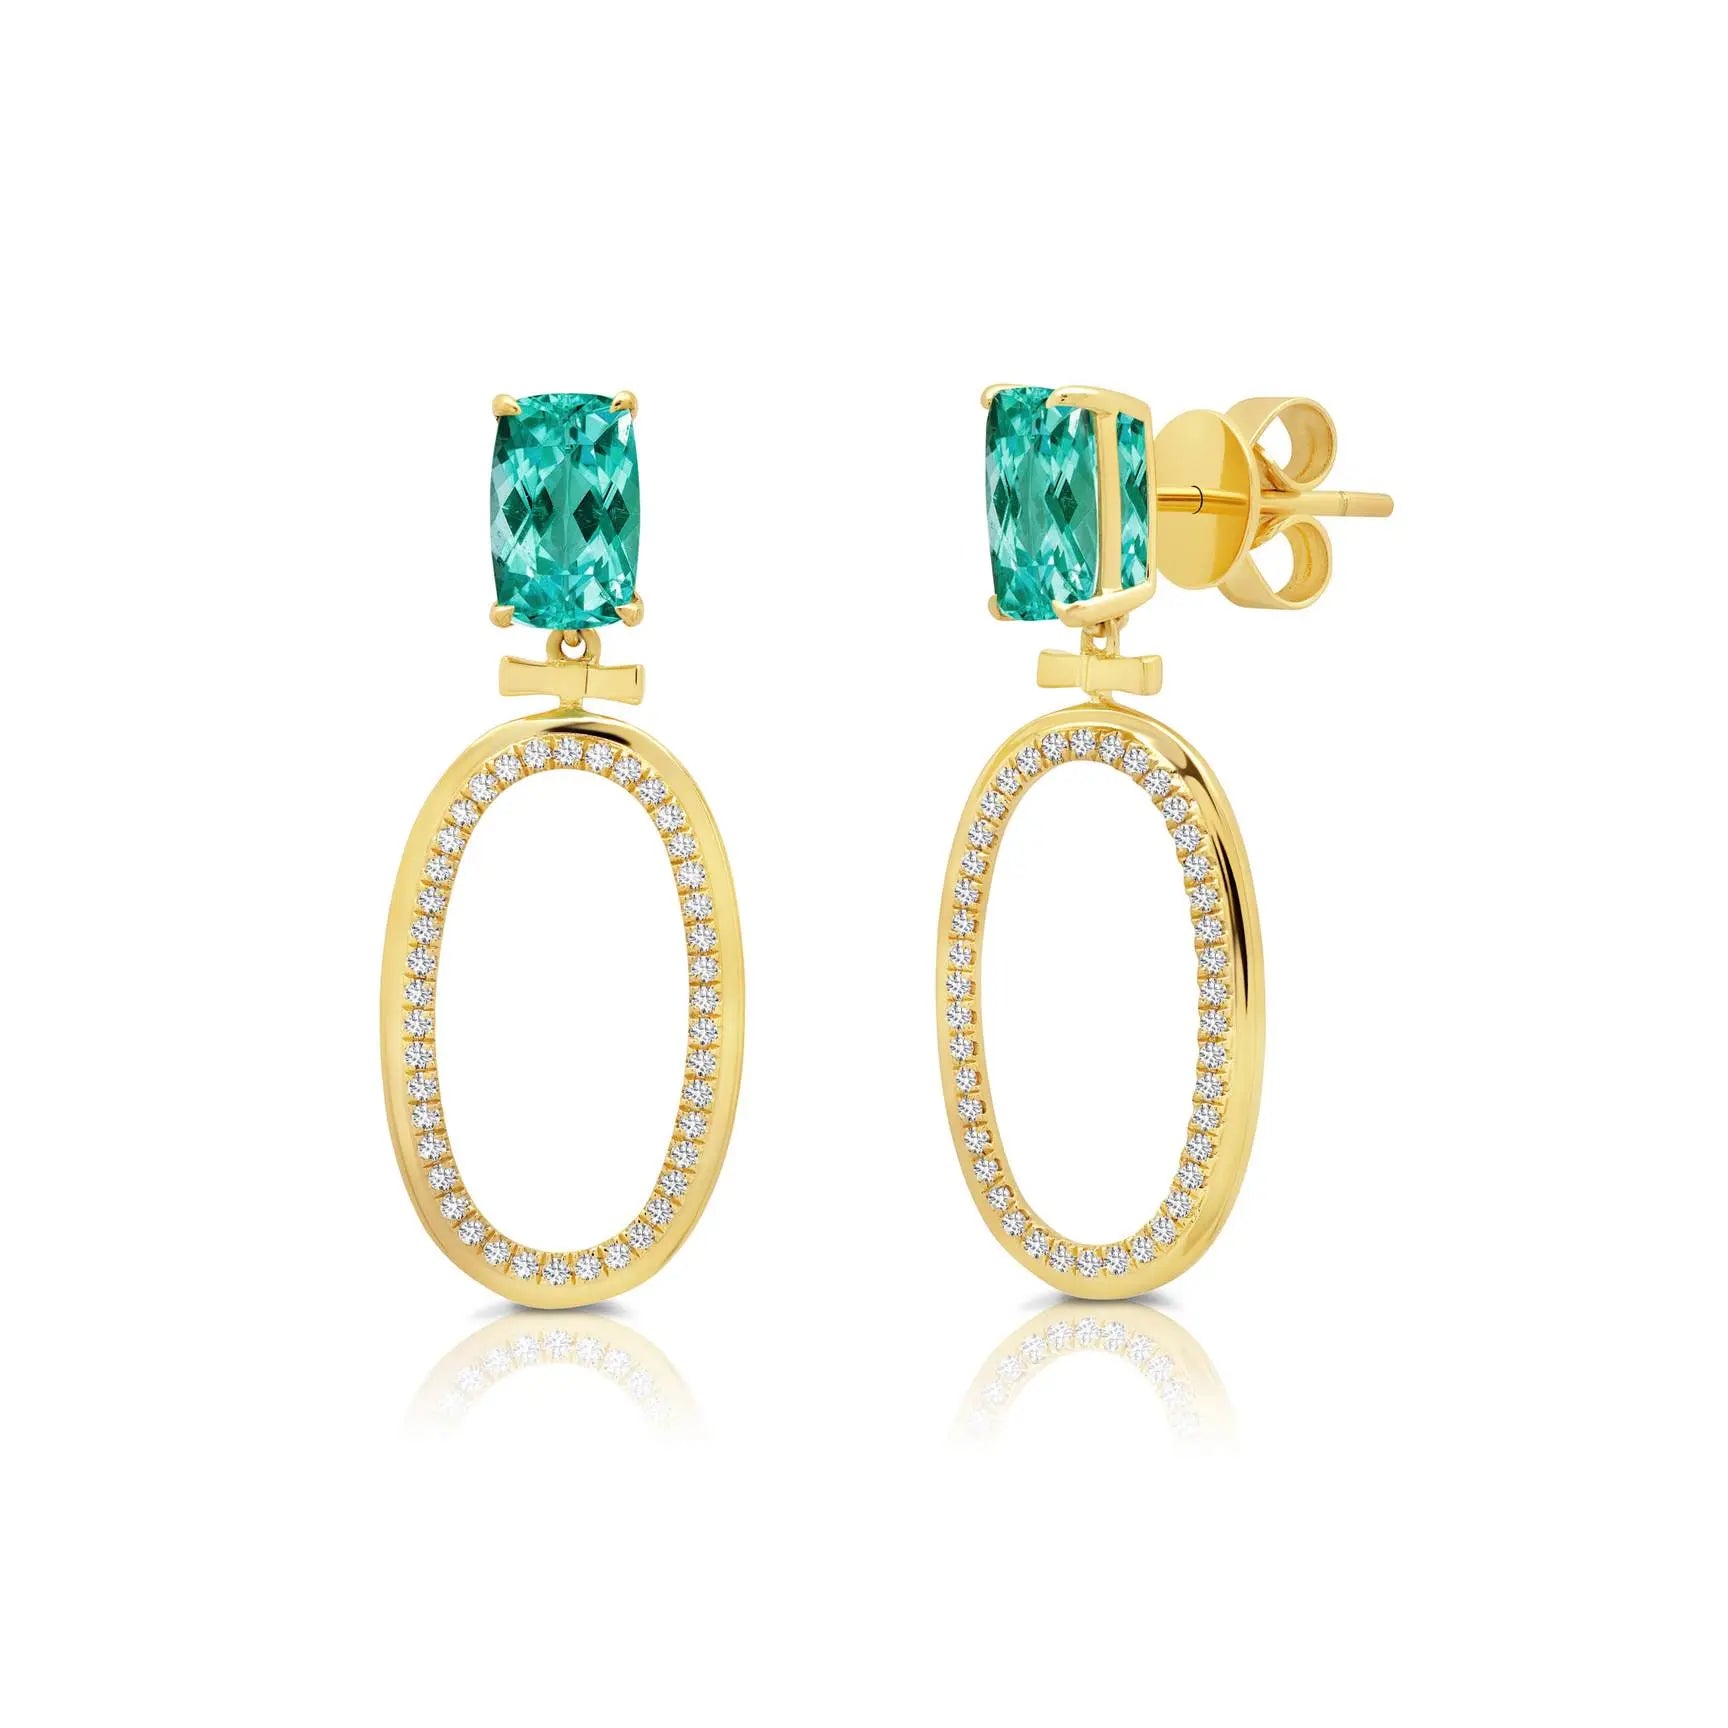 18k yellow gold with 2.24 Carats of Graziela Blue-Green Tourmaline, .27 Carats of G-H Color White Diamonds  Measurement:  Earring Measures 1 CM W X 3 CM Finishing:  Post & Clutch Back Designed by Graziela Gems